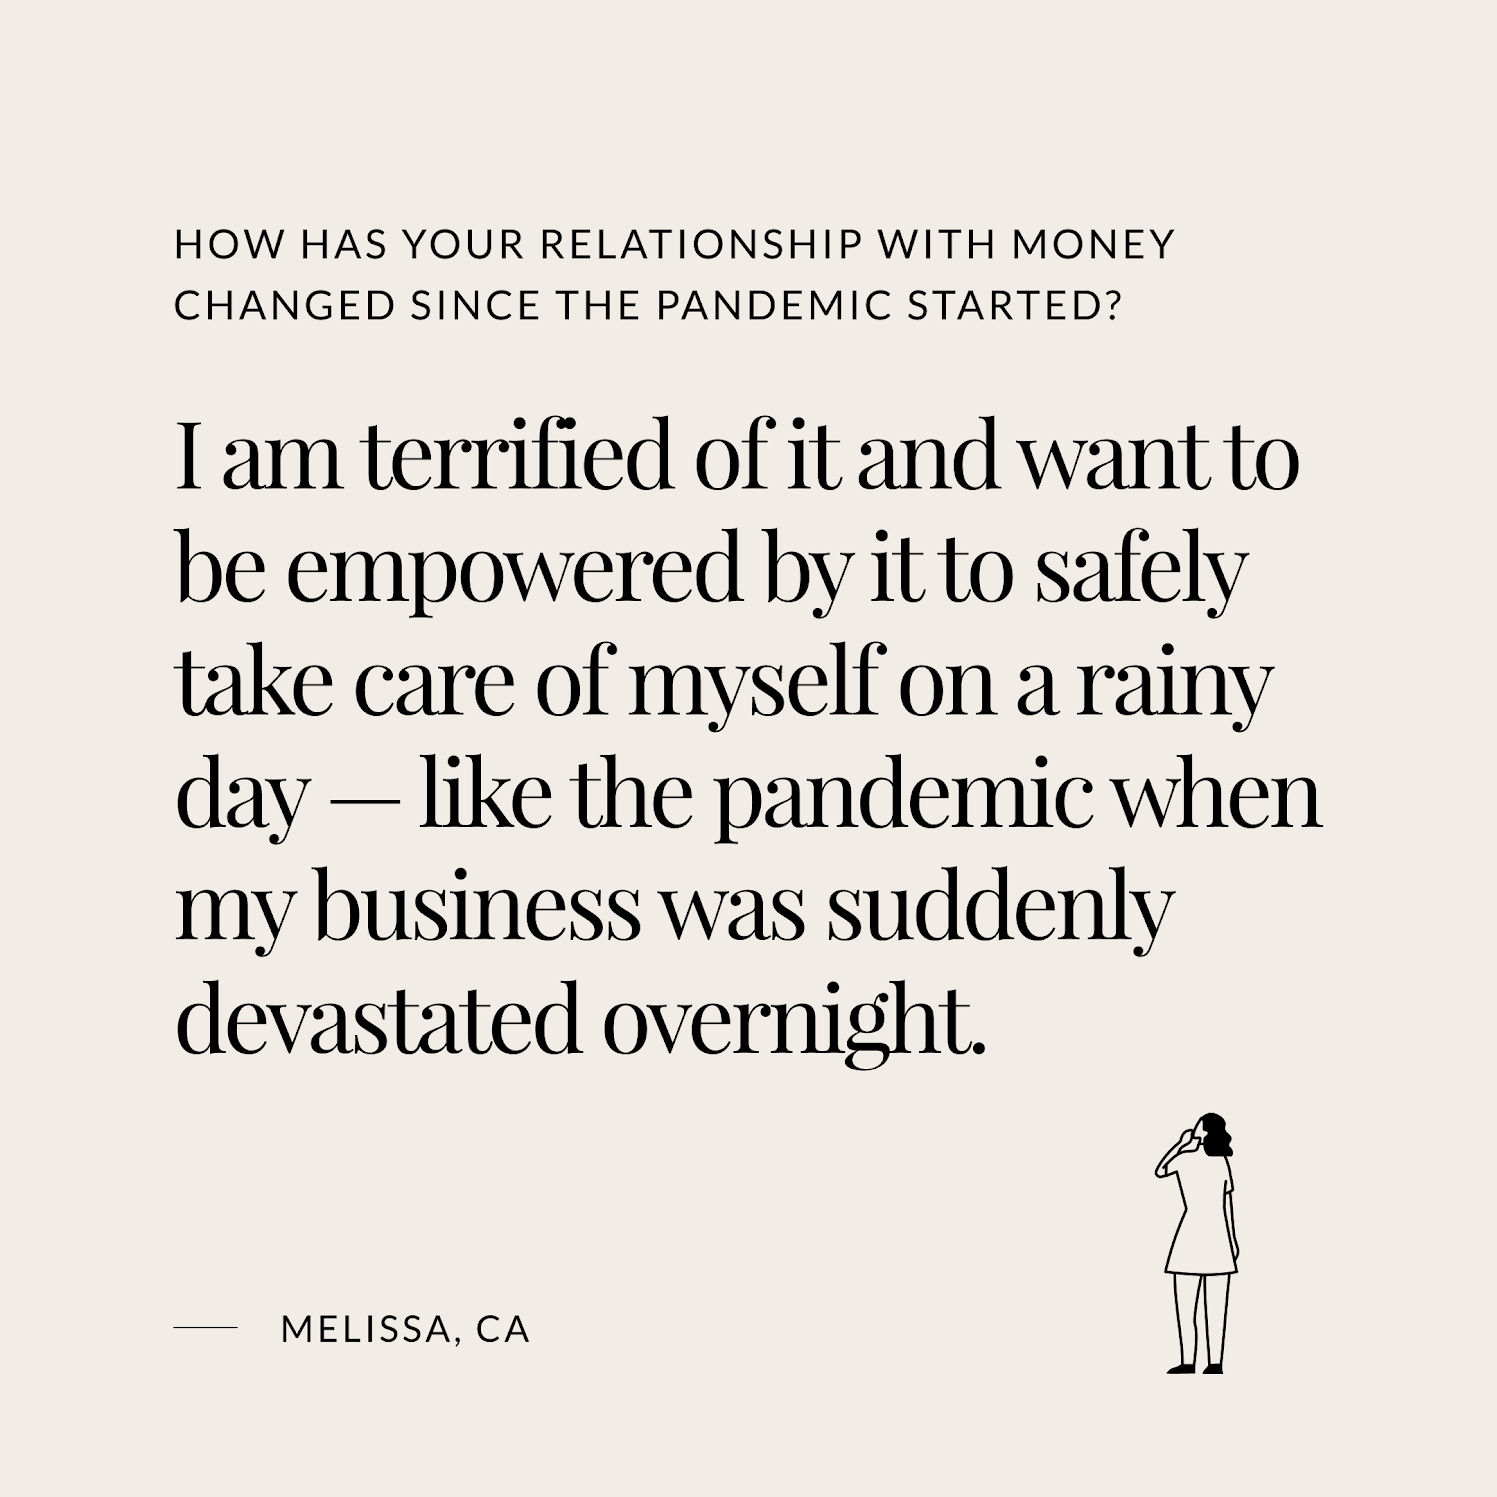 A quote from survey respondent Melissa about how she is terrified by money but wants to be empowered by it.